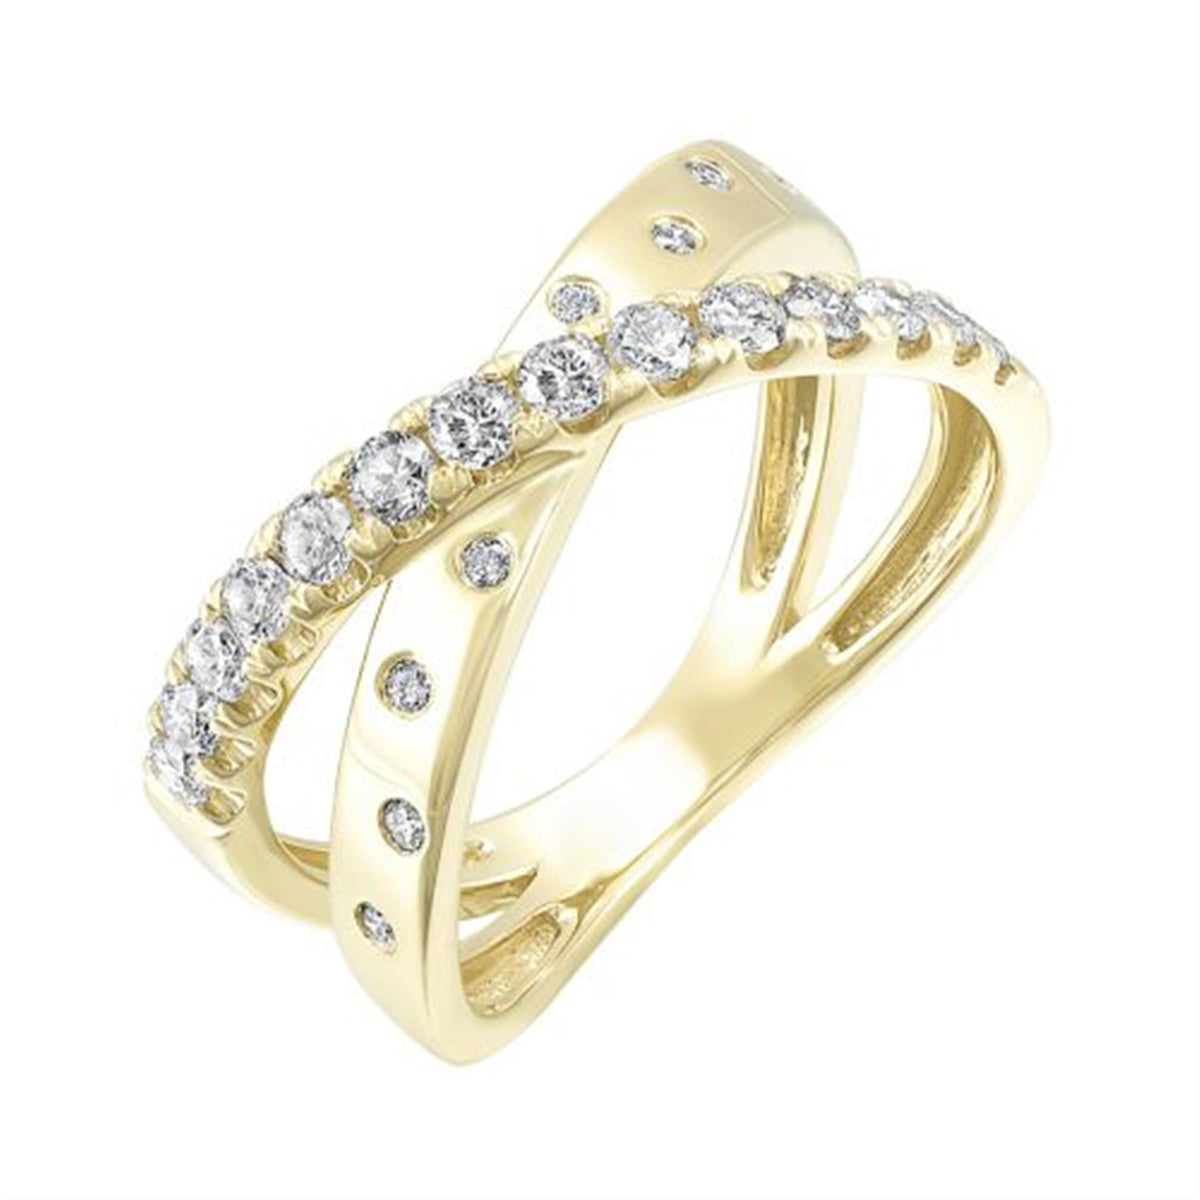 14Kt Yellow Gold Crossover Fashion Ring With 0.50cttw Natural Diamonds